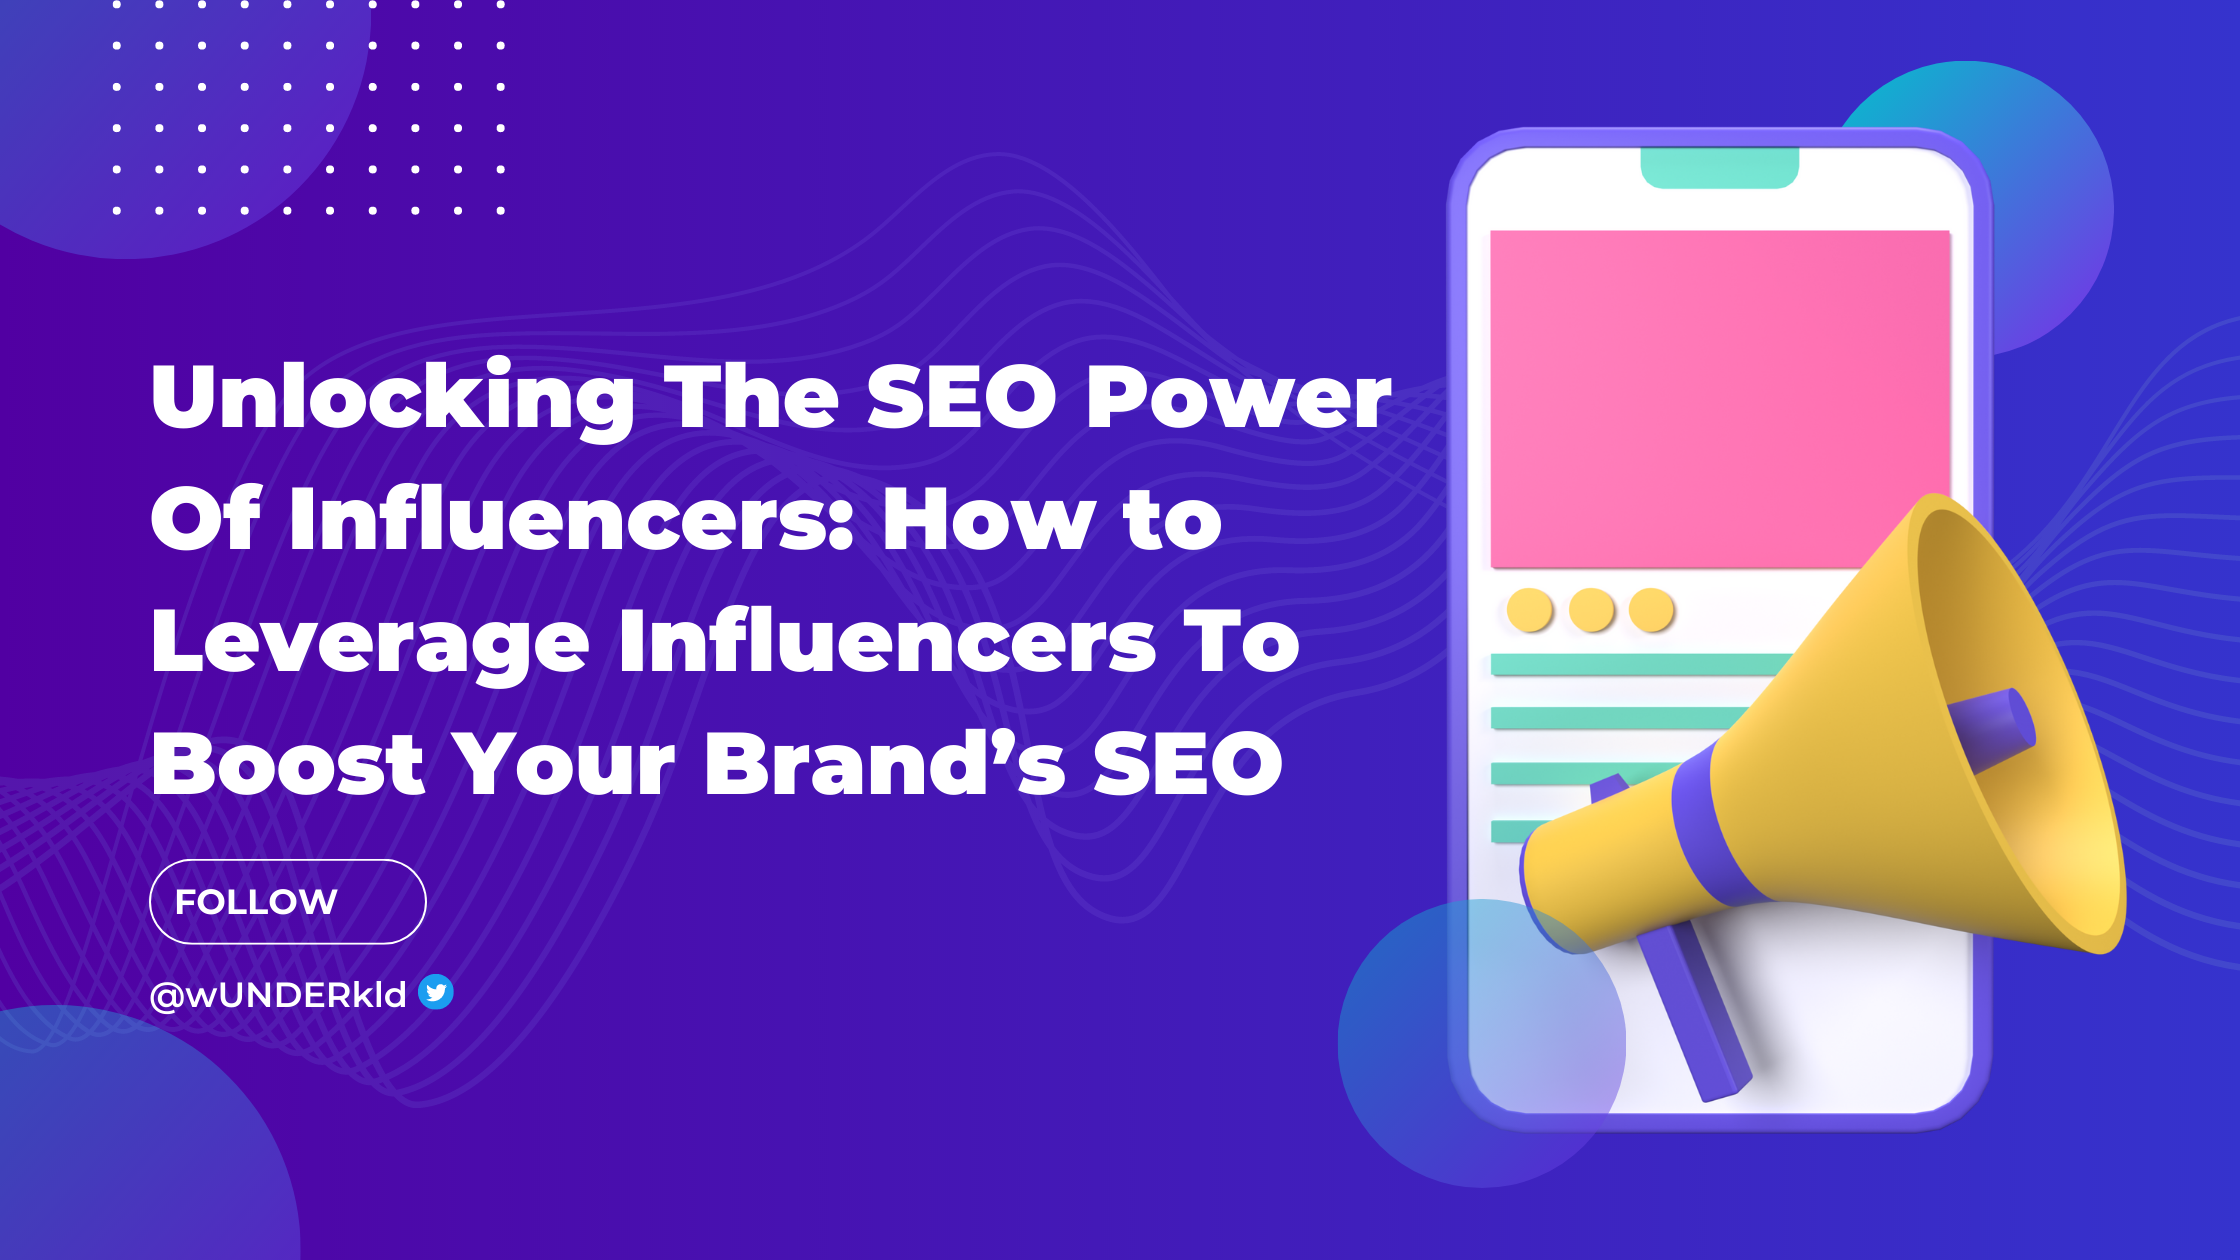 Unlocking The SEO Power Of Influencers: How to Leverage Influencers To Boost Your Brand’s SEO